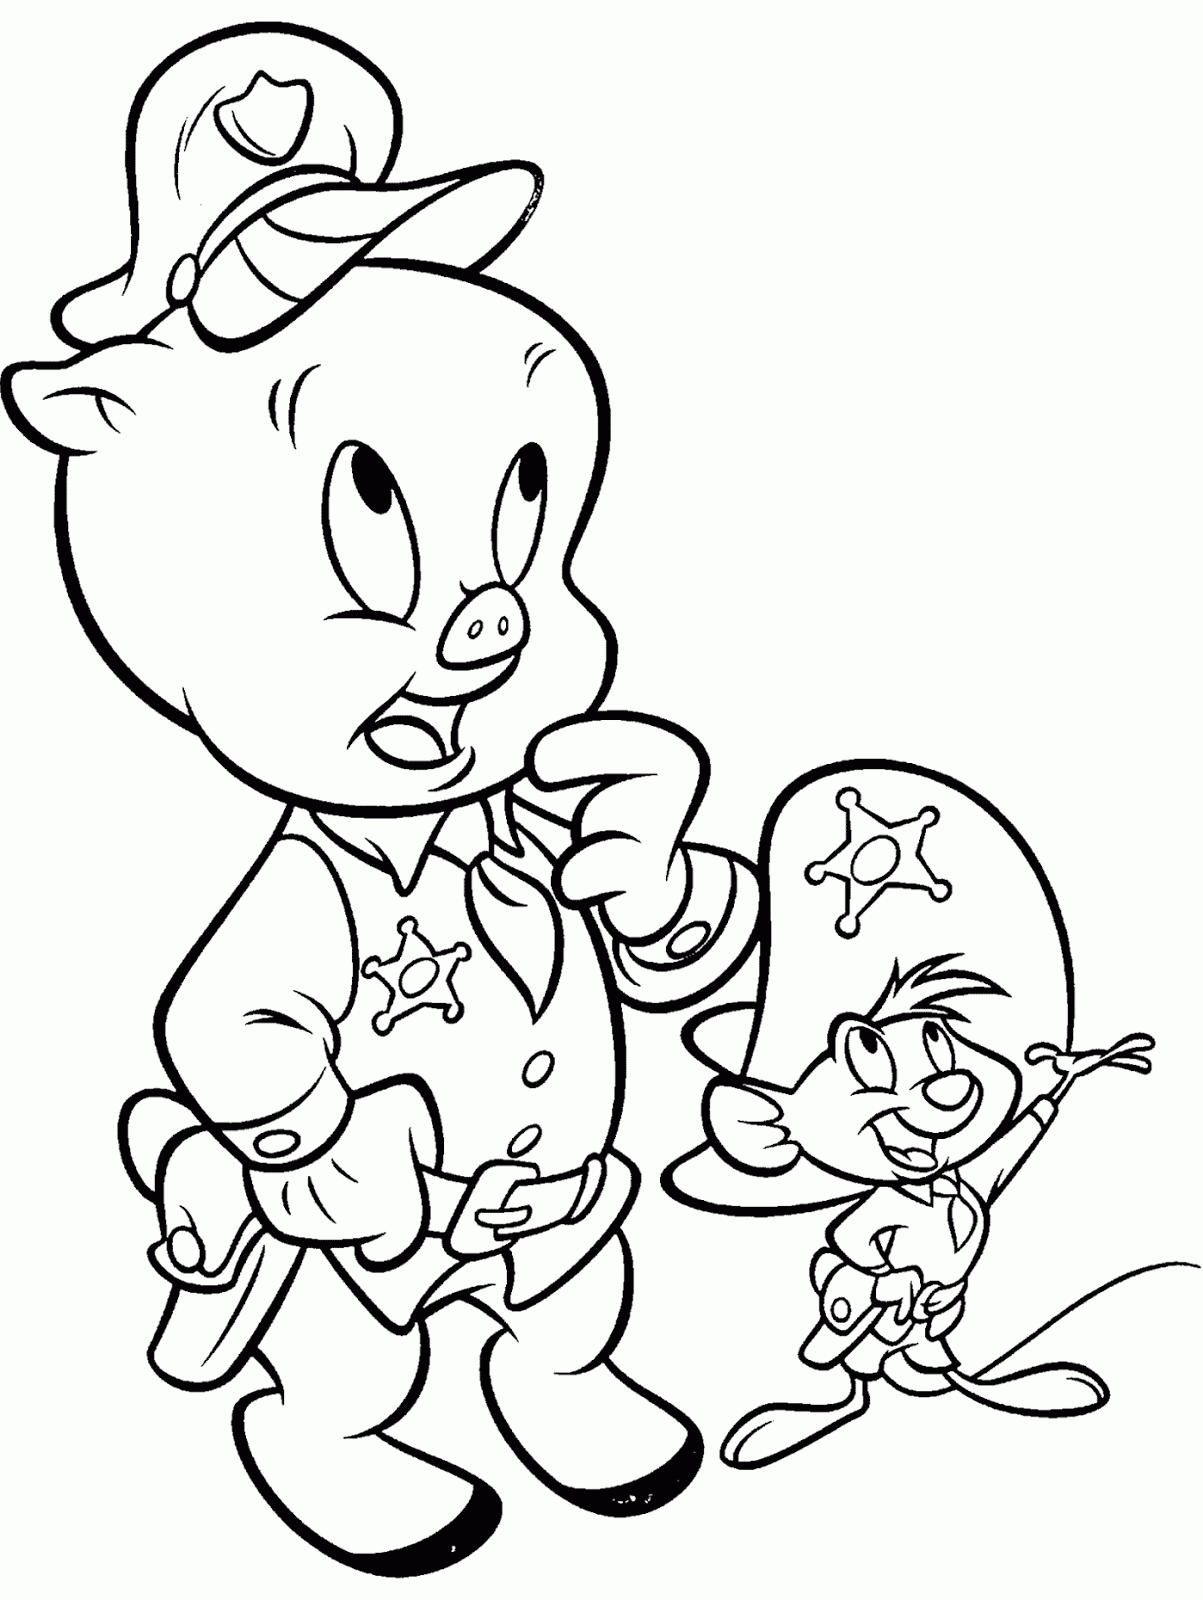 Looney Tunes Coloring Pages TV Film Looney Tunes to Print Printable 2020 04610 Coloring4free